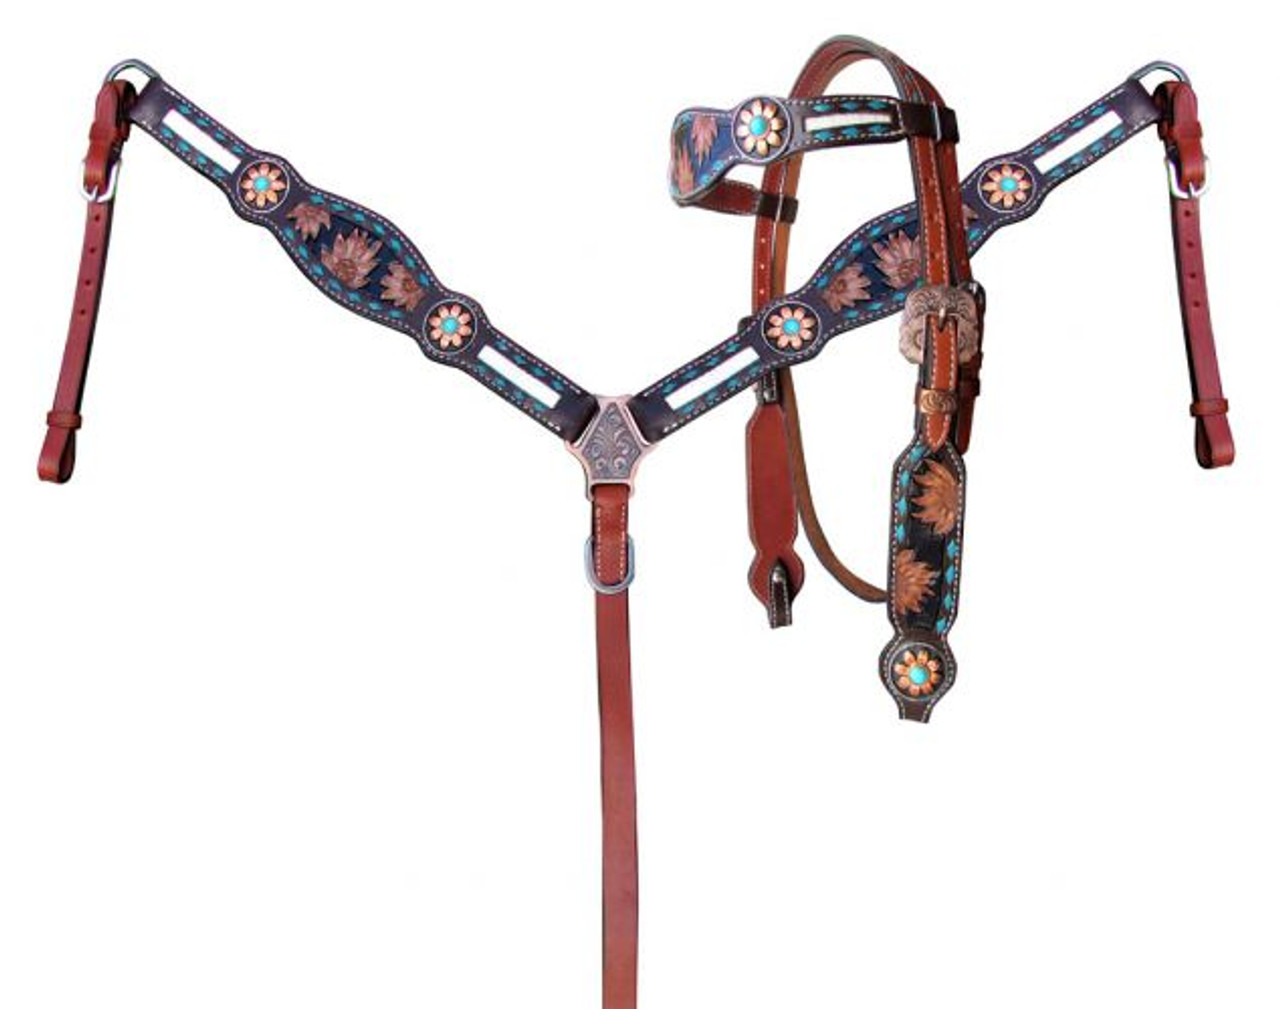 Showman Hand Painted Sunflower & Cactus Brow Band Headstall & Breast Collar Set! 